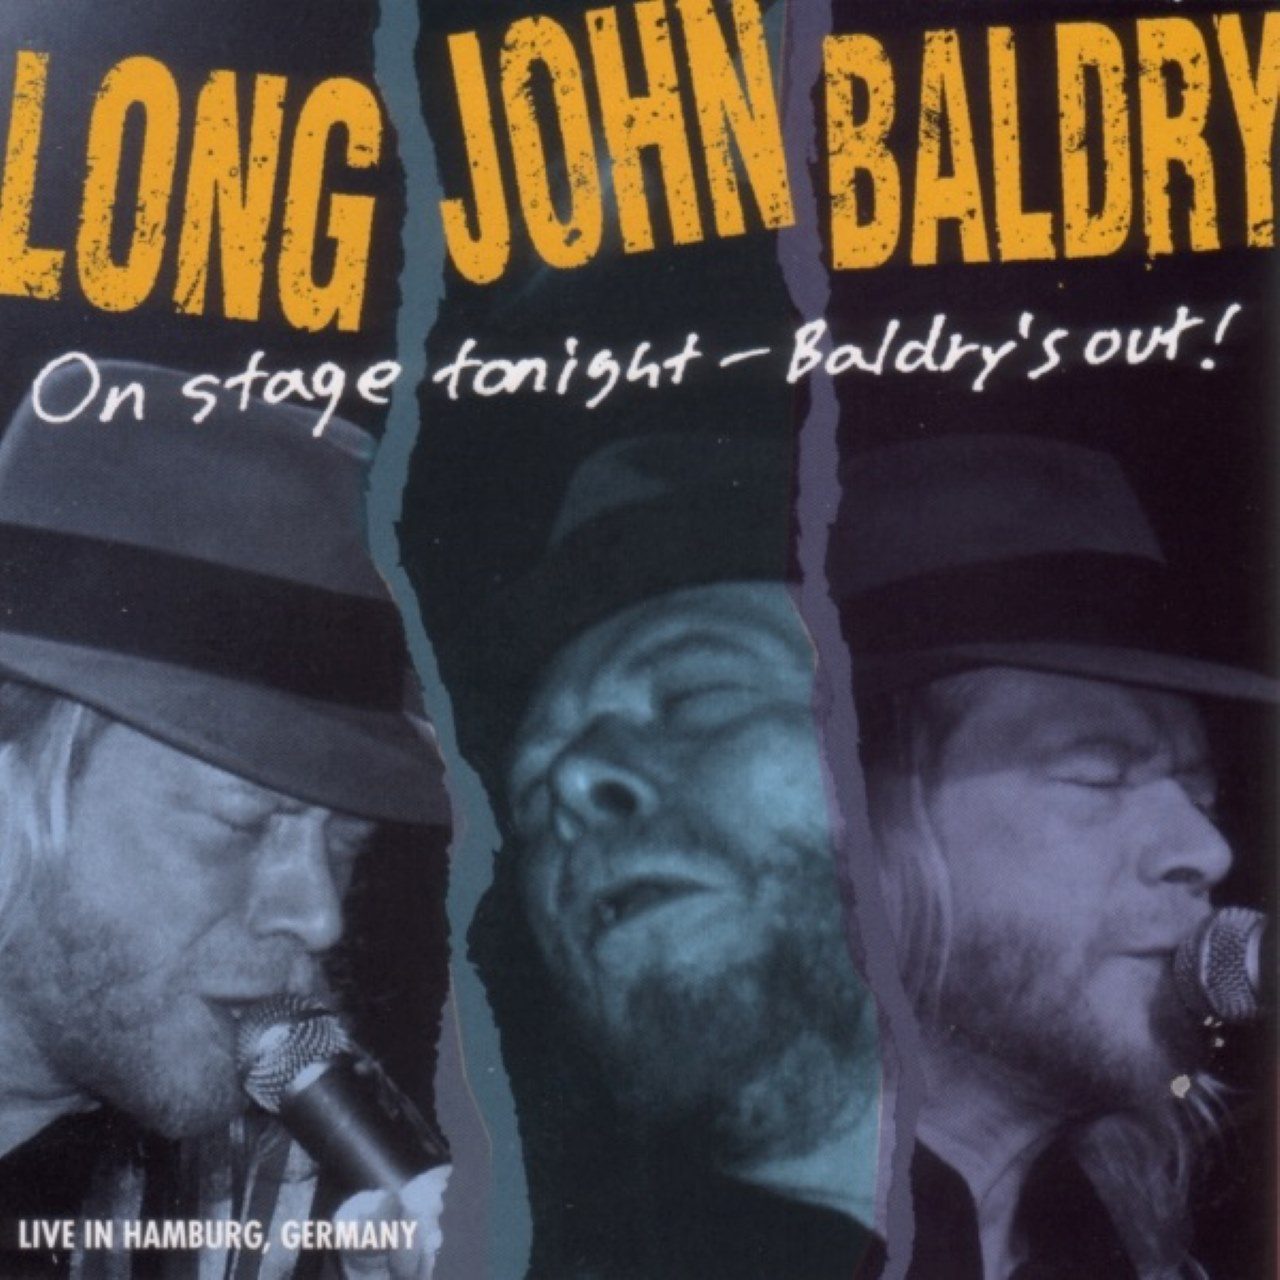 Long John Baldry – On Stage Tonight – Baldry’s Out cover album